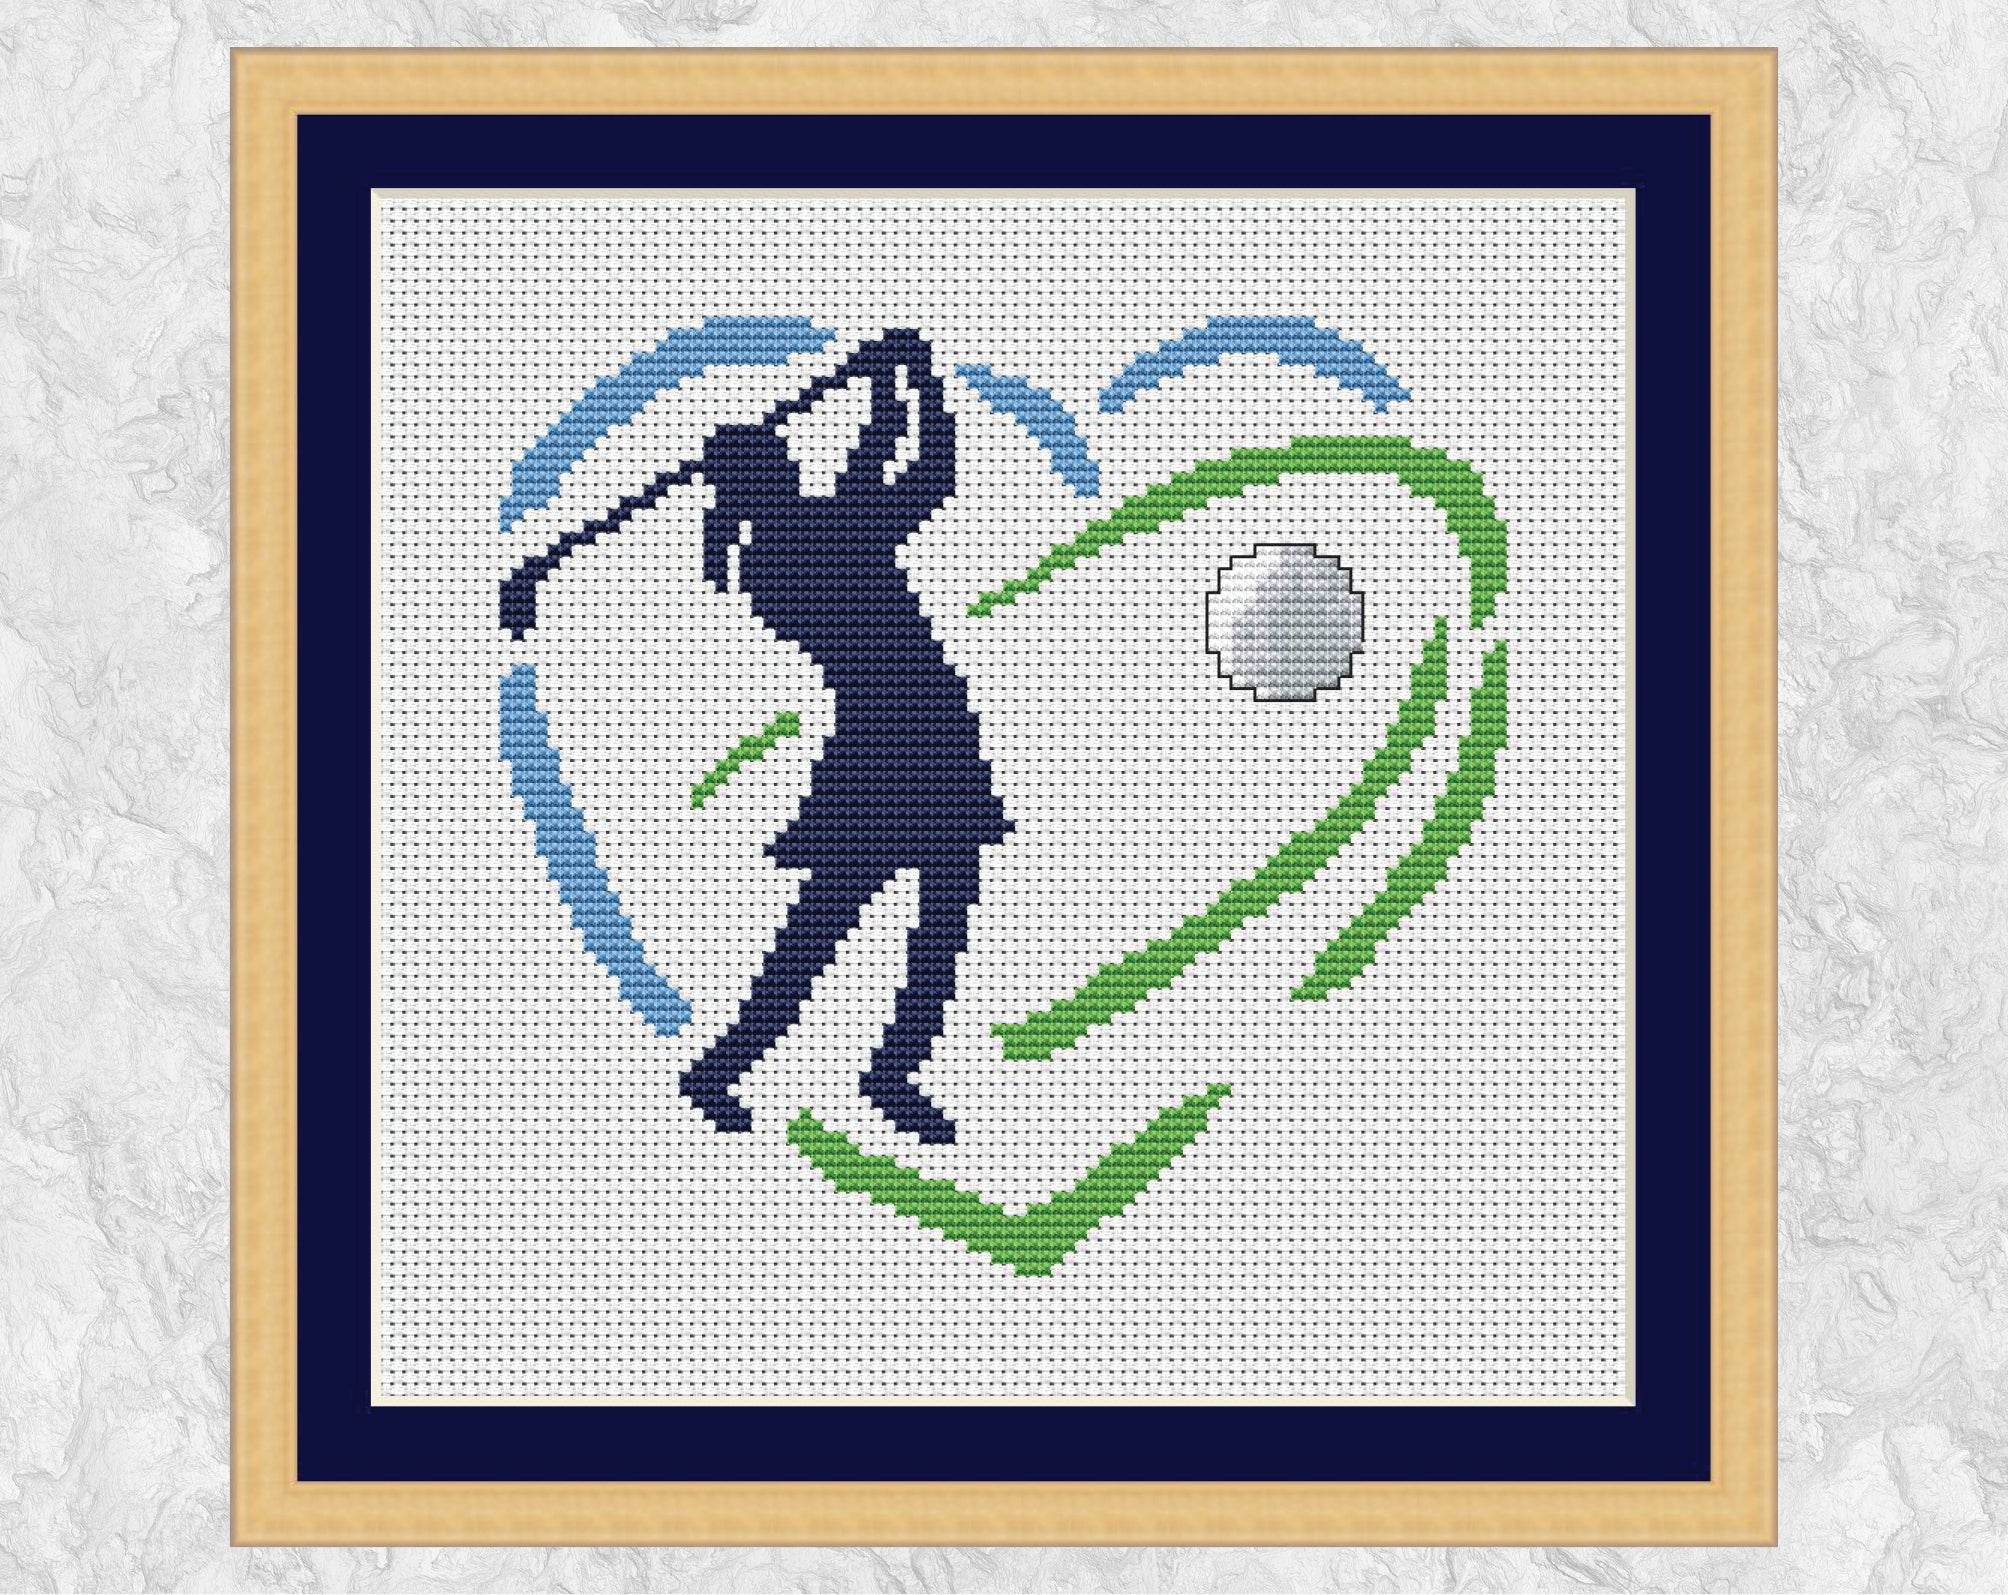 Golf Heart cross stitch pattern, with golfer wearing a skirt. Shown in frame.